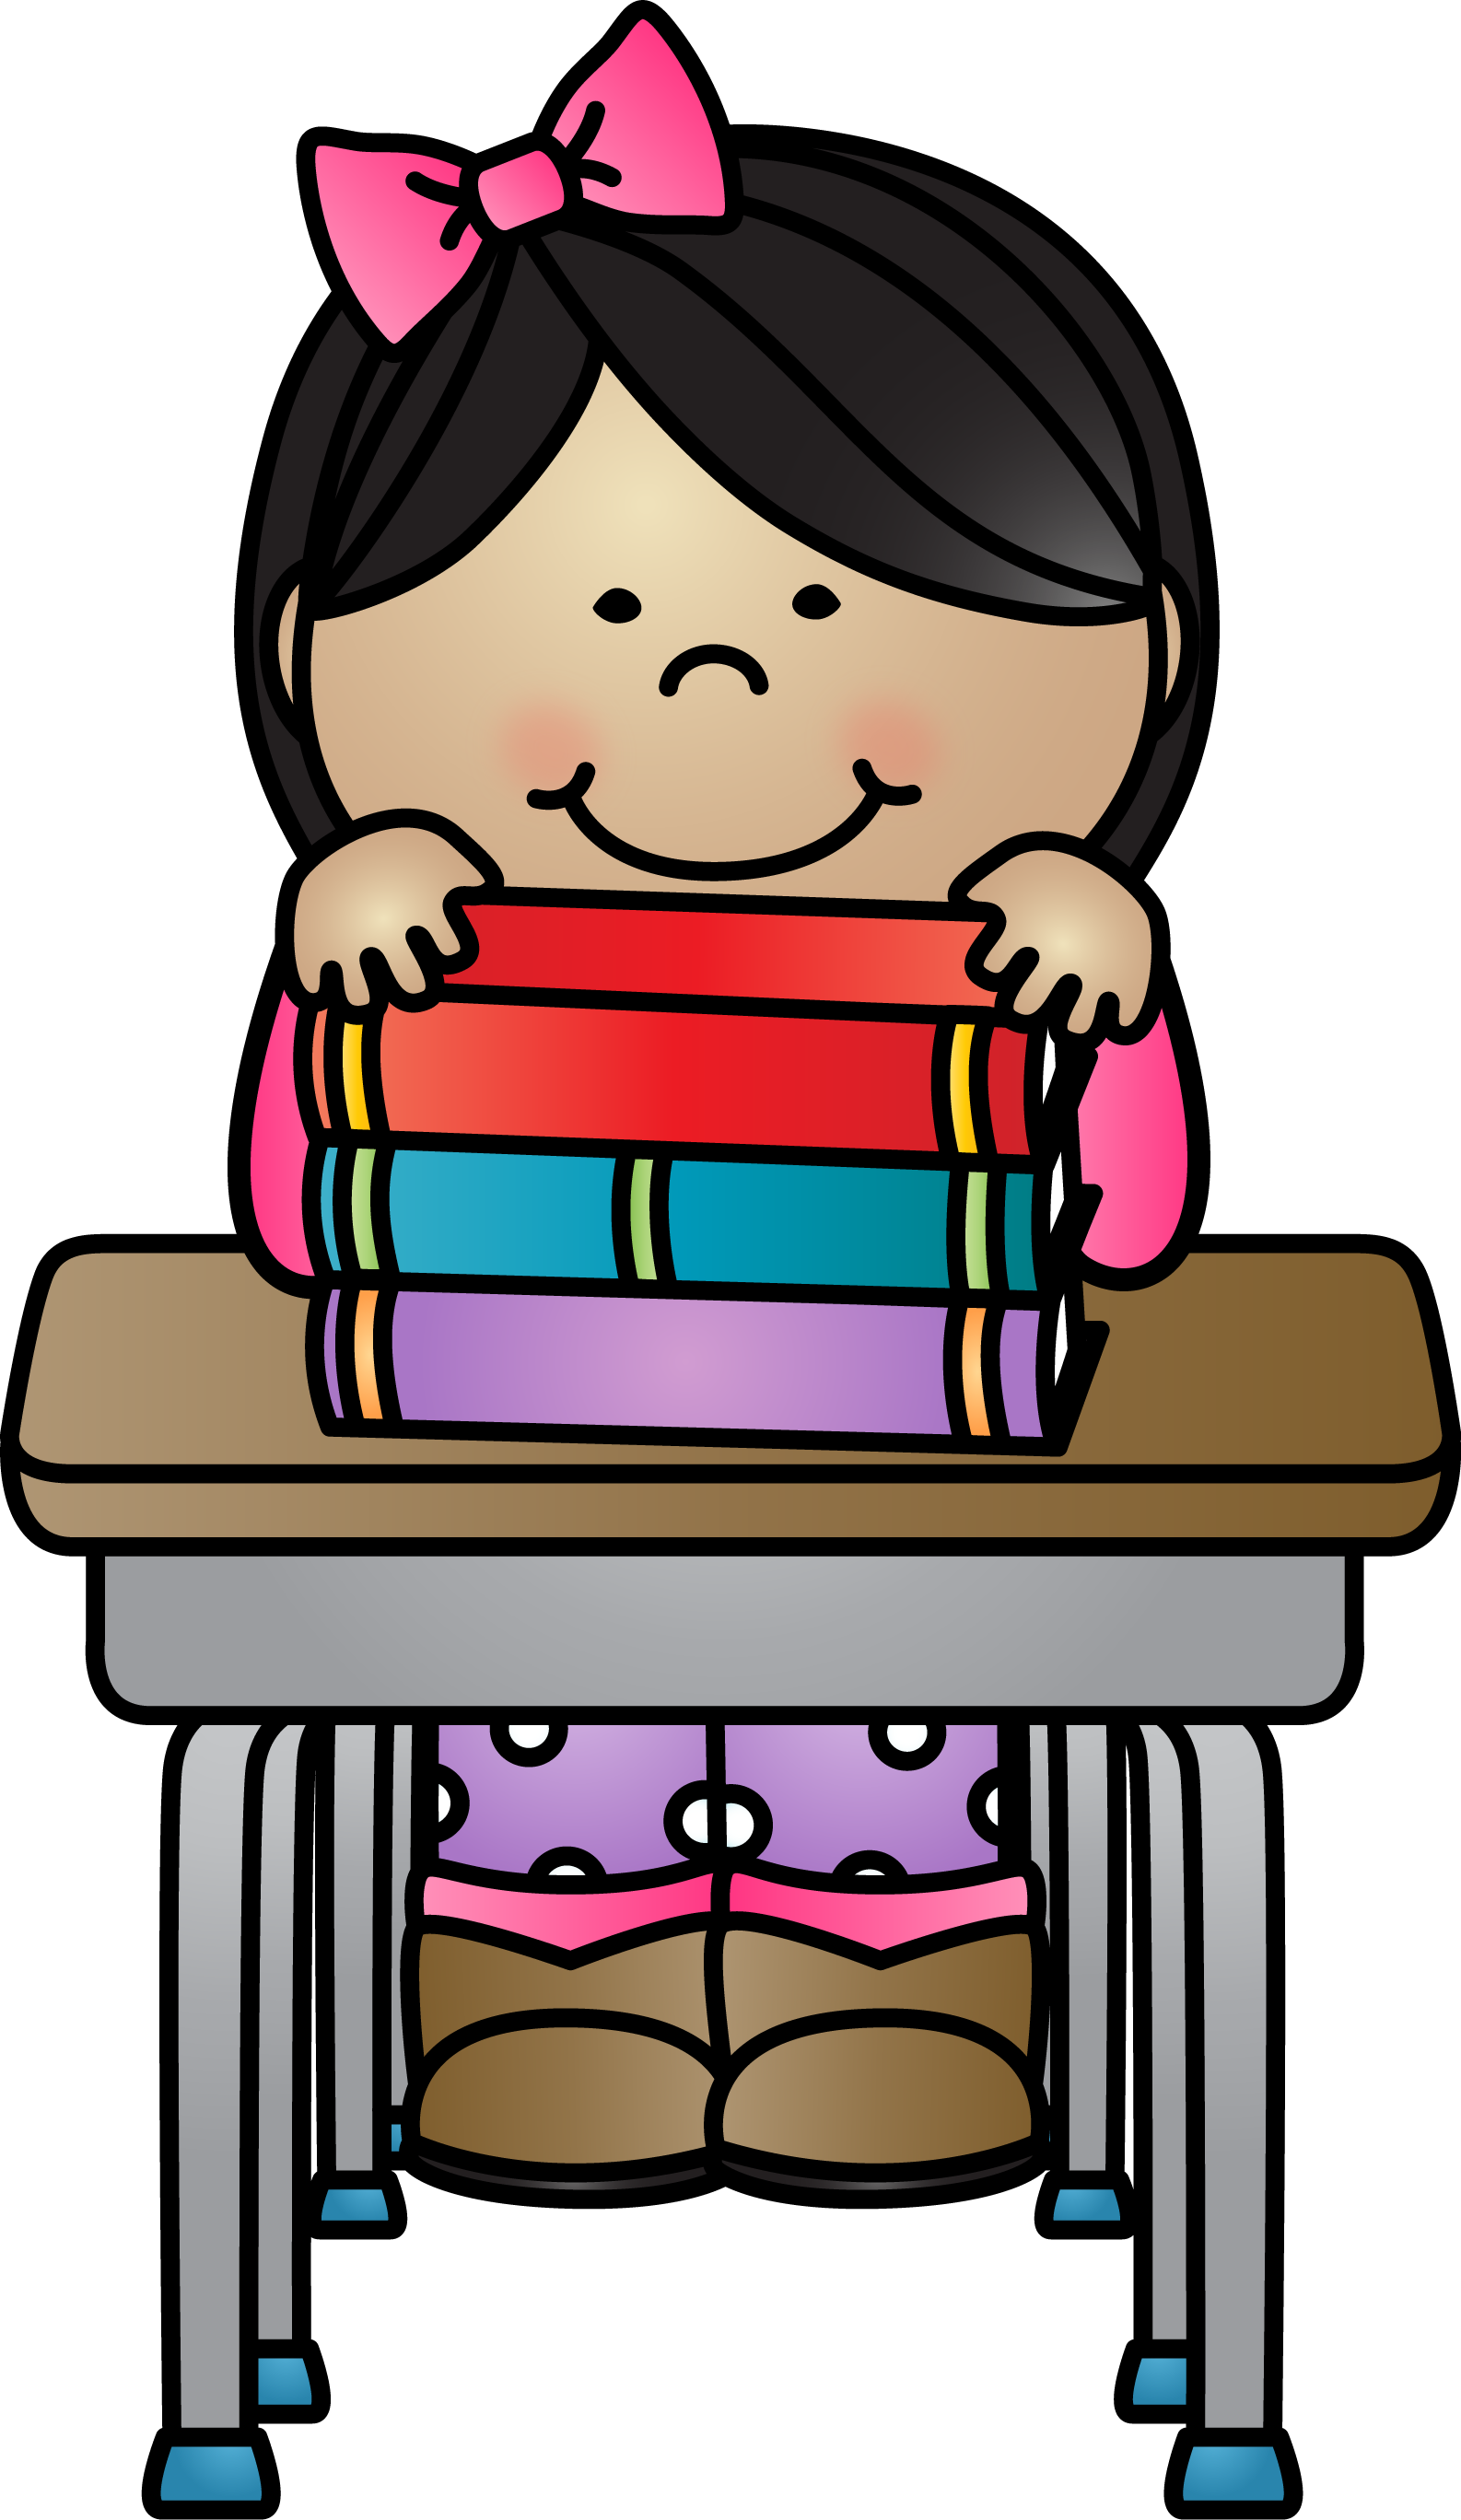 girl-with-books-bts_WhimsyClips.png